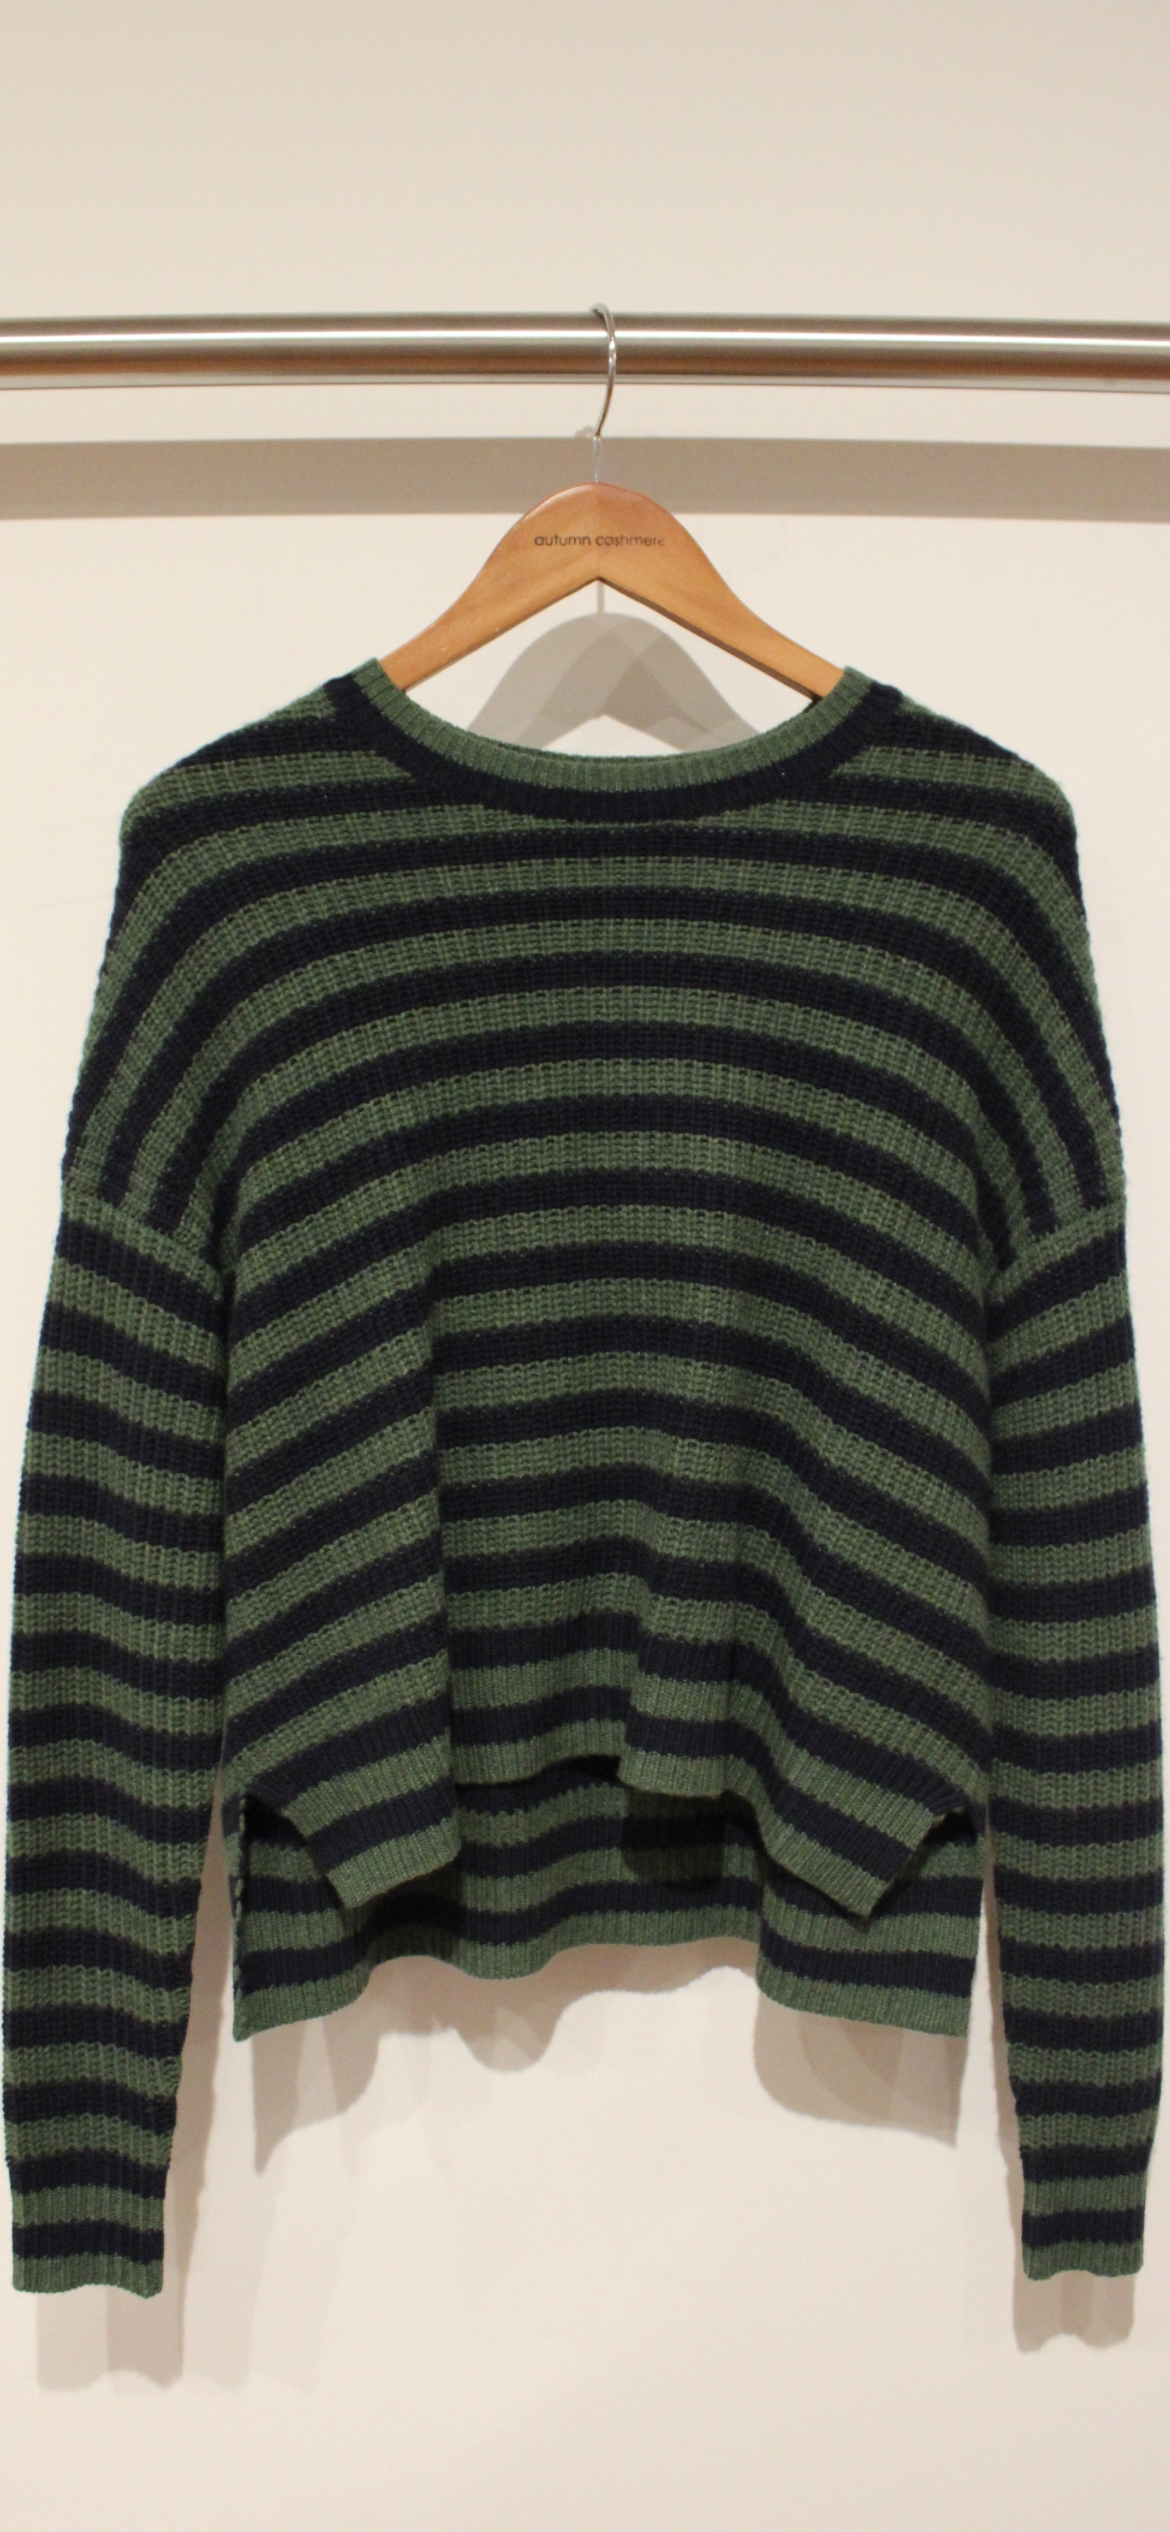 AUTUMN CASHMERE-6Ply Striped Shaker Crew Pickle/Navy